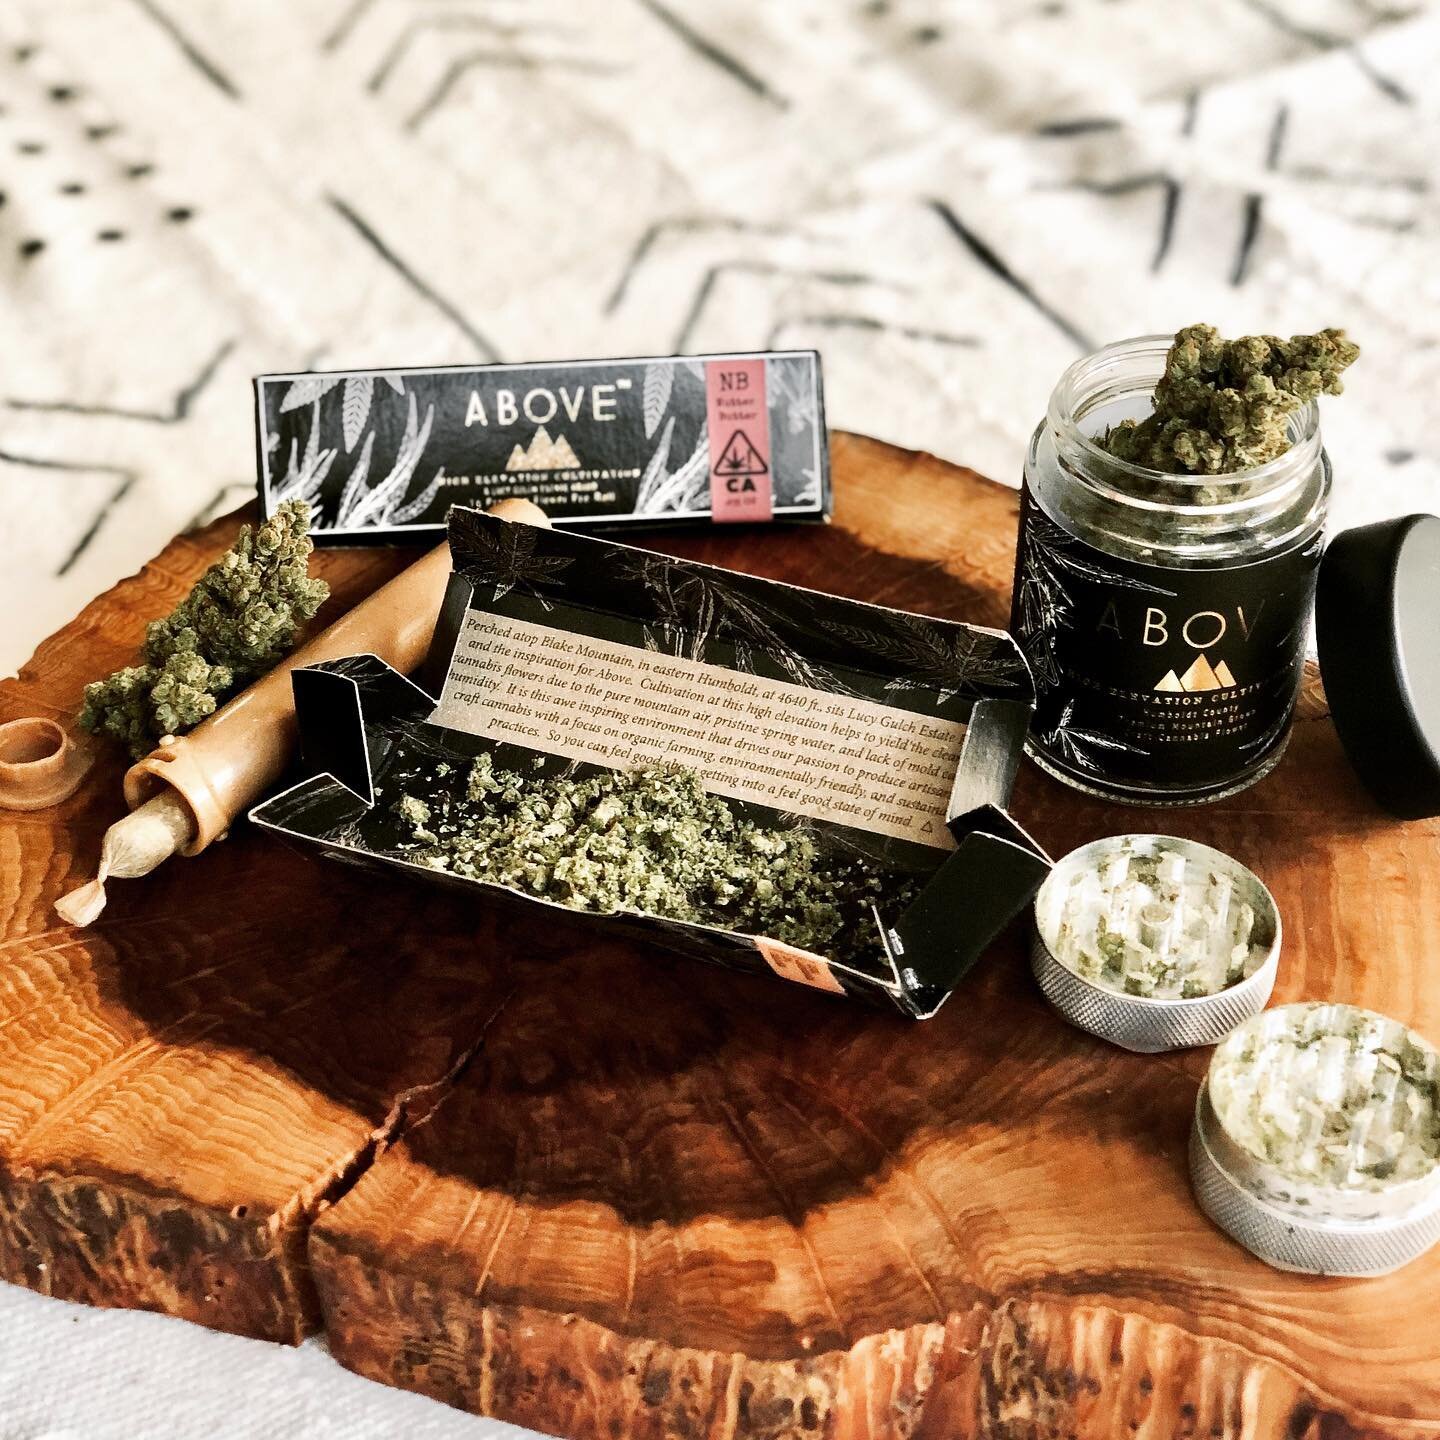 💡Our signature triangle pre-roll box makes for a great rolling trays when you are ready to roll your own. 
.
+ We now offer our flower in quarter oz jars! The same great flower we use in our pre-rolls. You decide how you want to indulge.
.
💯% Earth